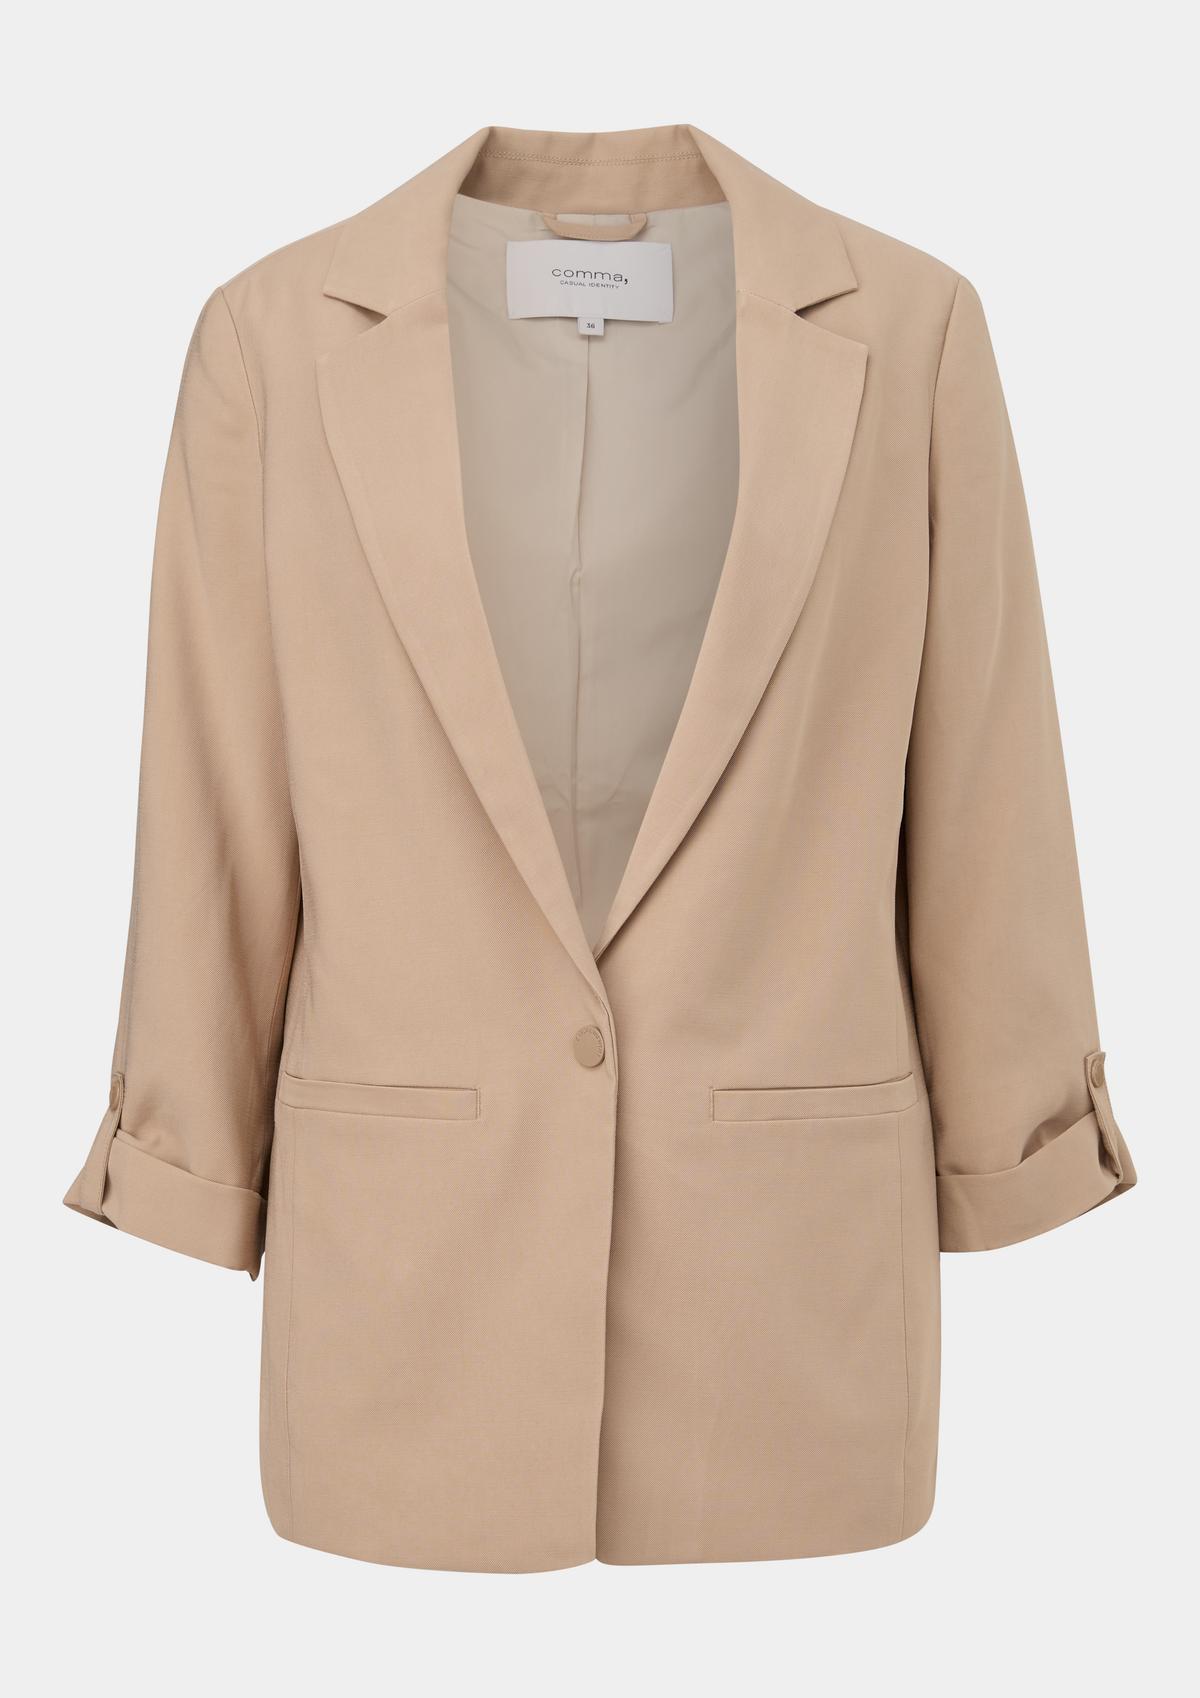 comma Fitted blazer made of viscose twill